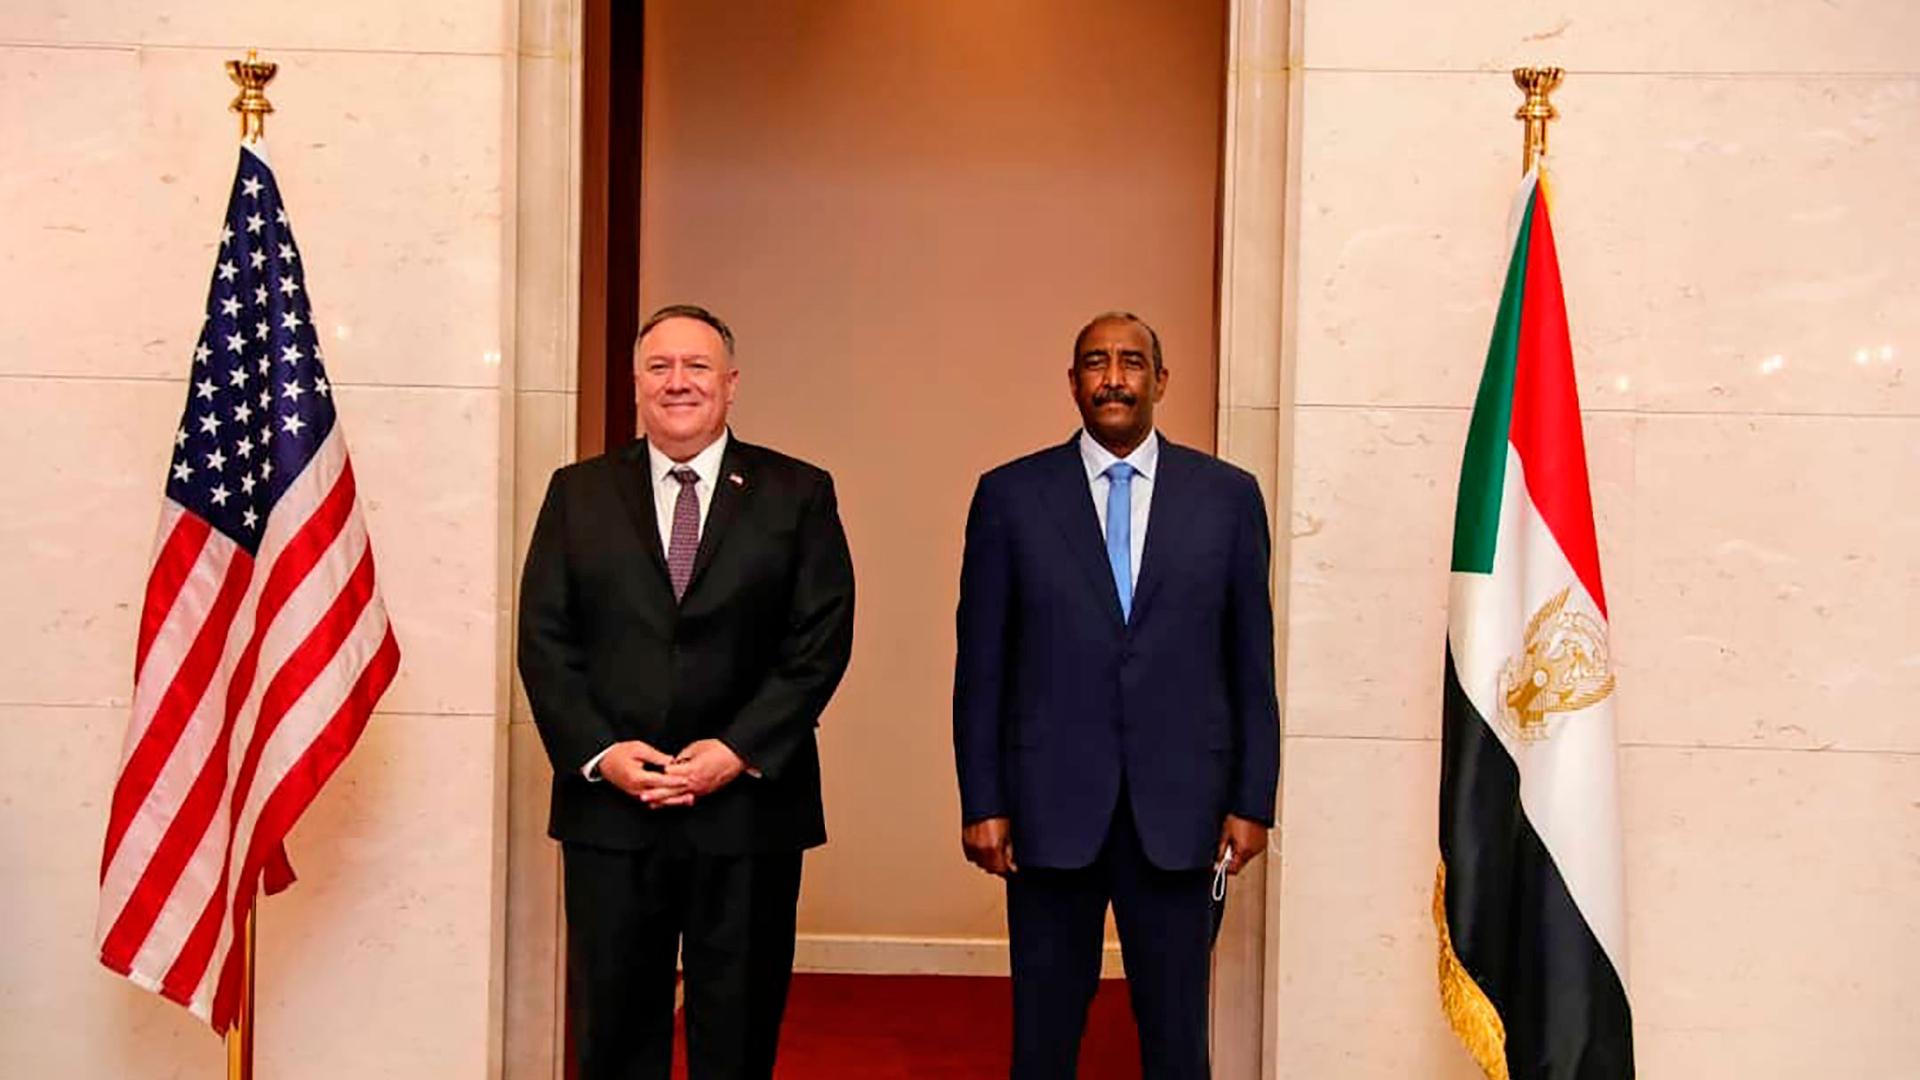 US Secretary of State Mike Pompeo is shown standing with Sudanese Gen. Abdel-Fattah Burhan with the US and Sudanese flags on either side.